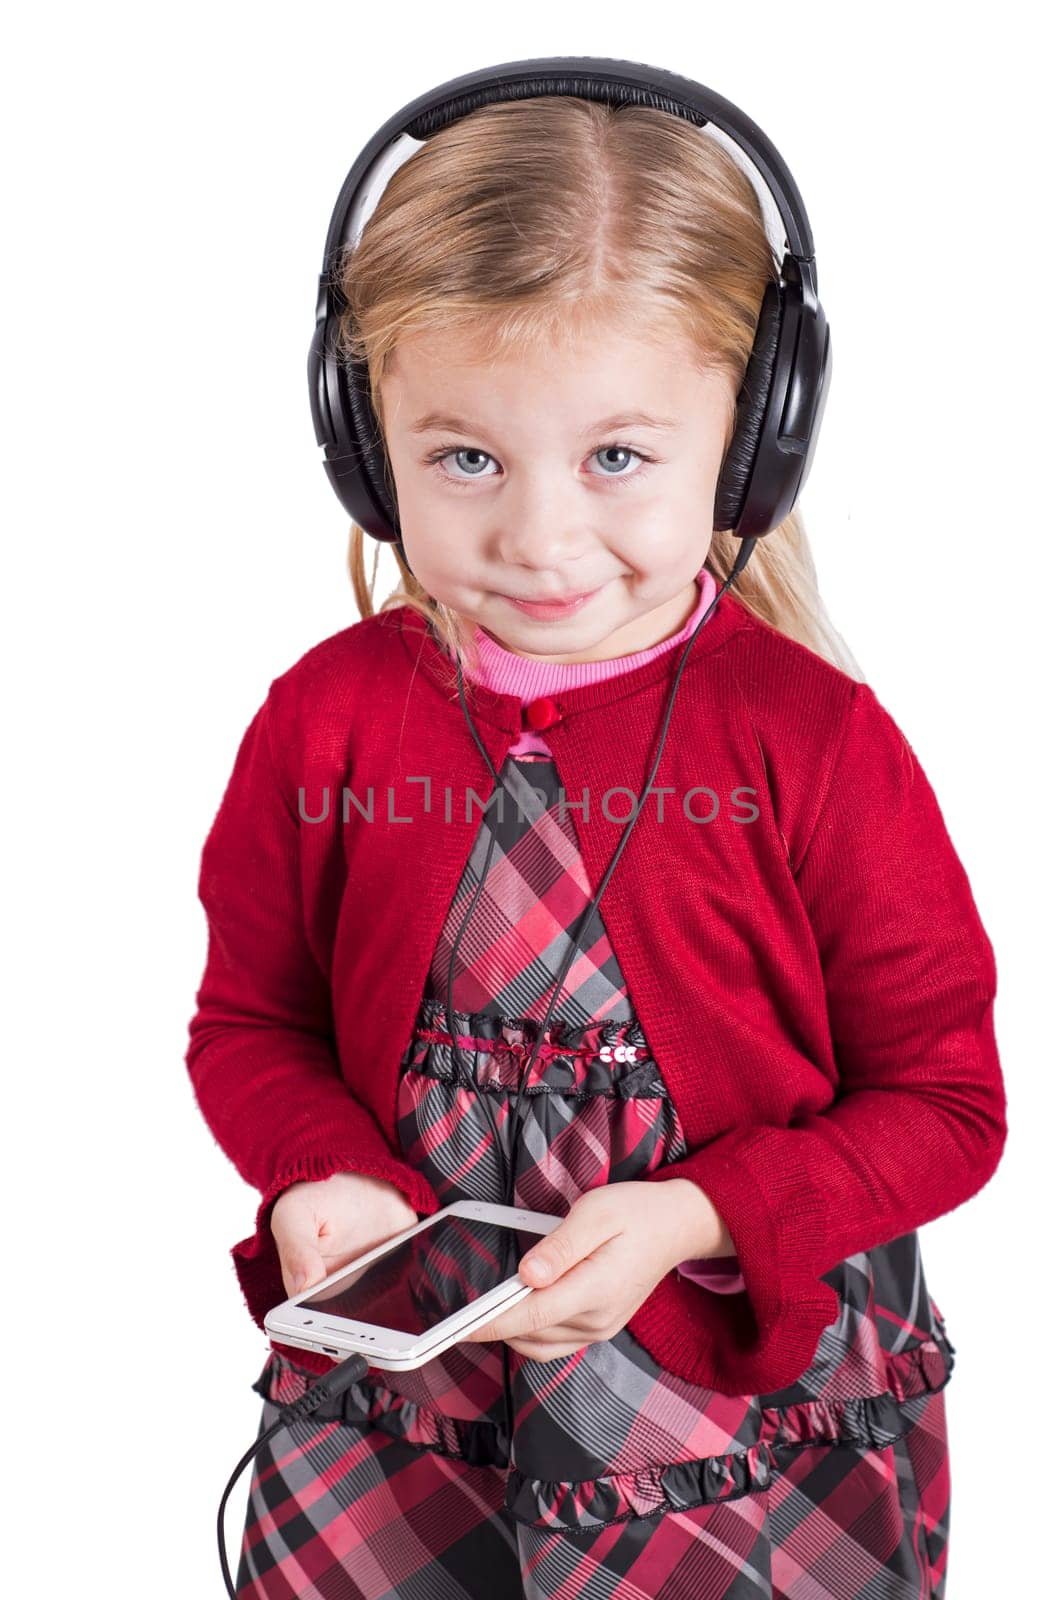 Education concept. An inquisitive child. Little blonde girl smiling while listening to music on smartphone mobile device with headphones by aprilphoto